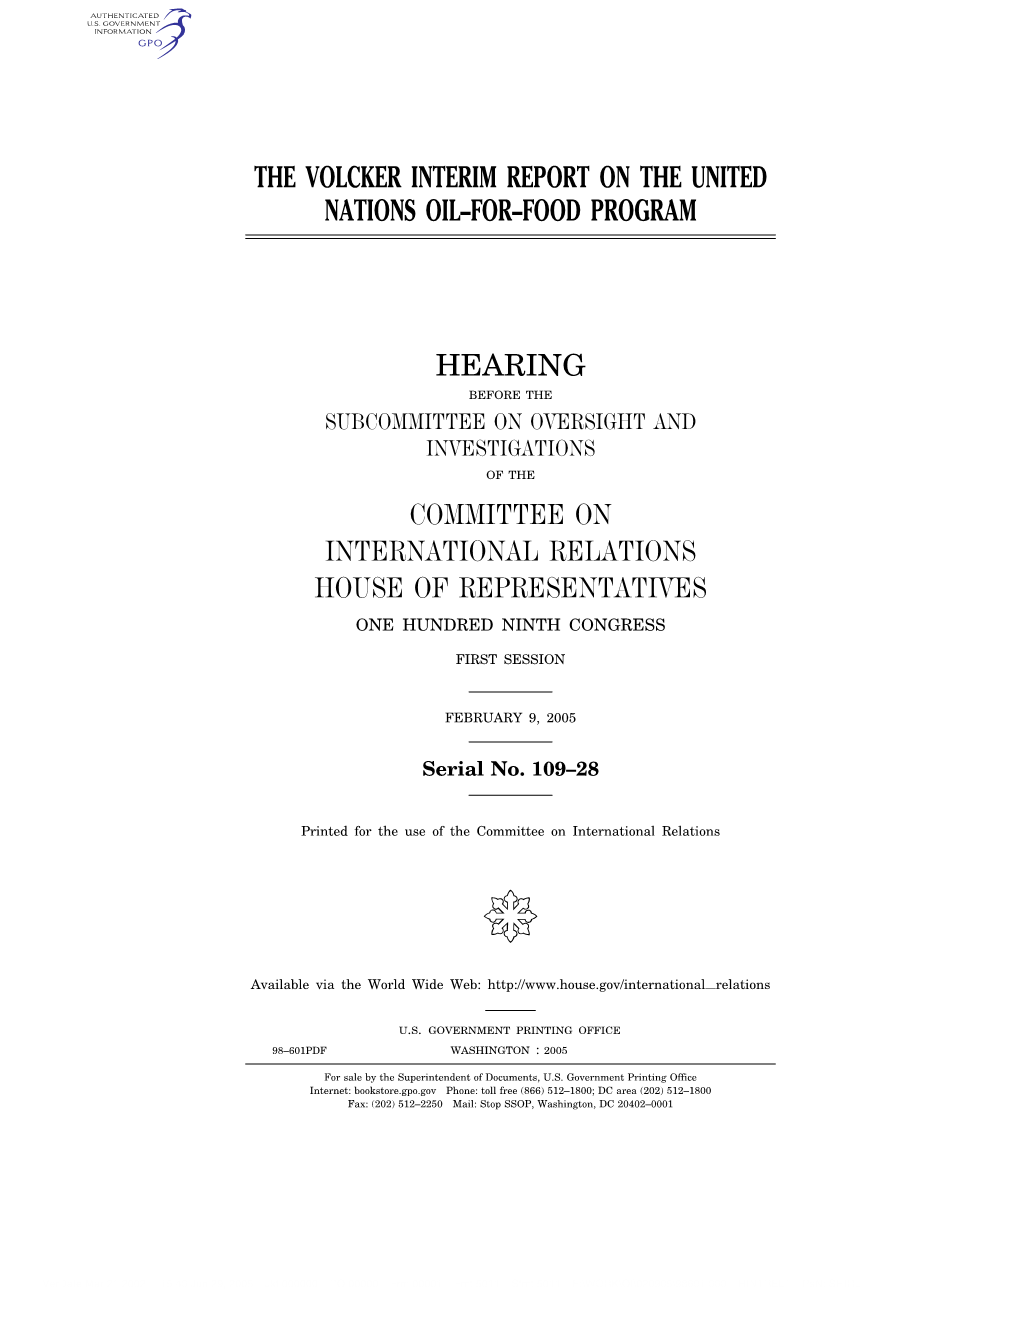 The Volcker Interim Report on the United Nations Oil–For–Food Program